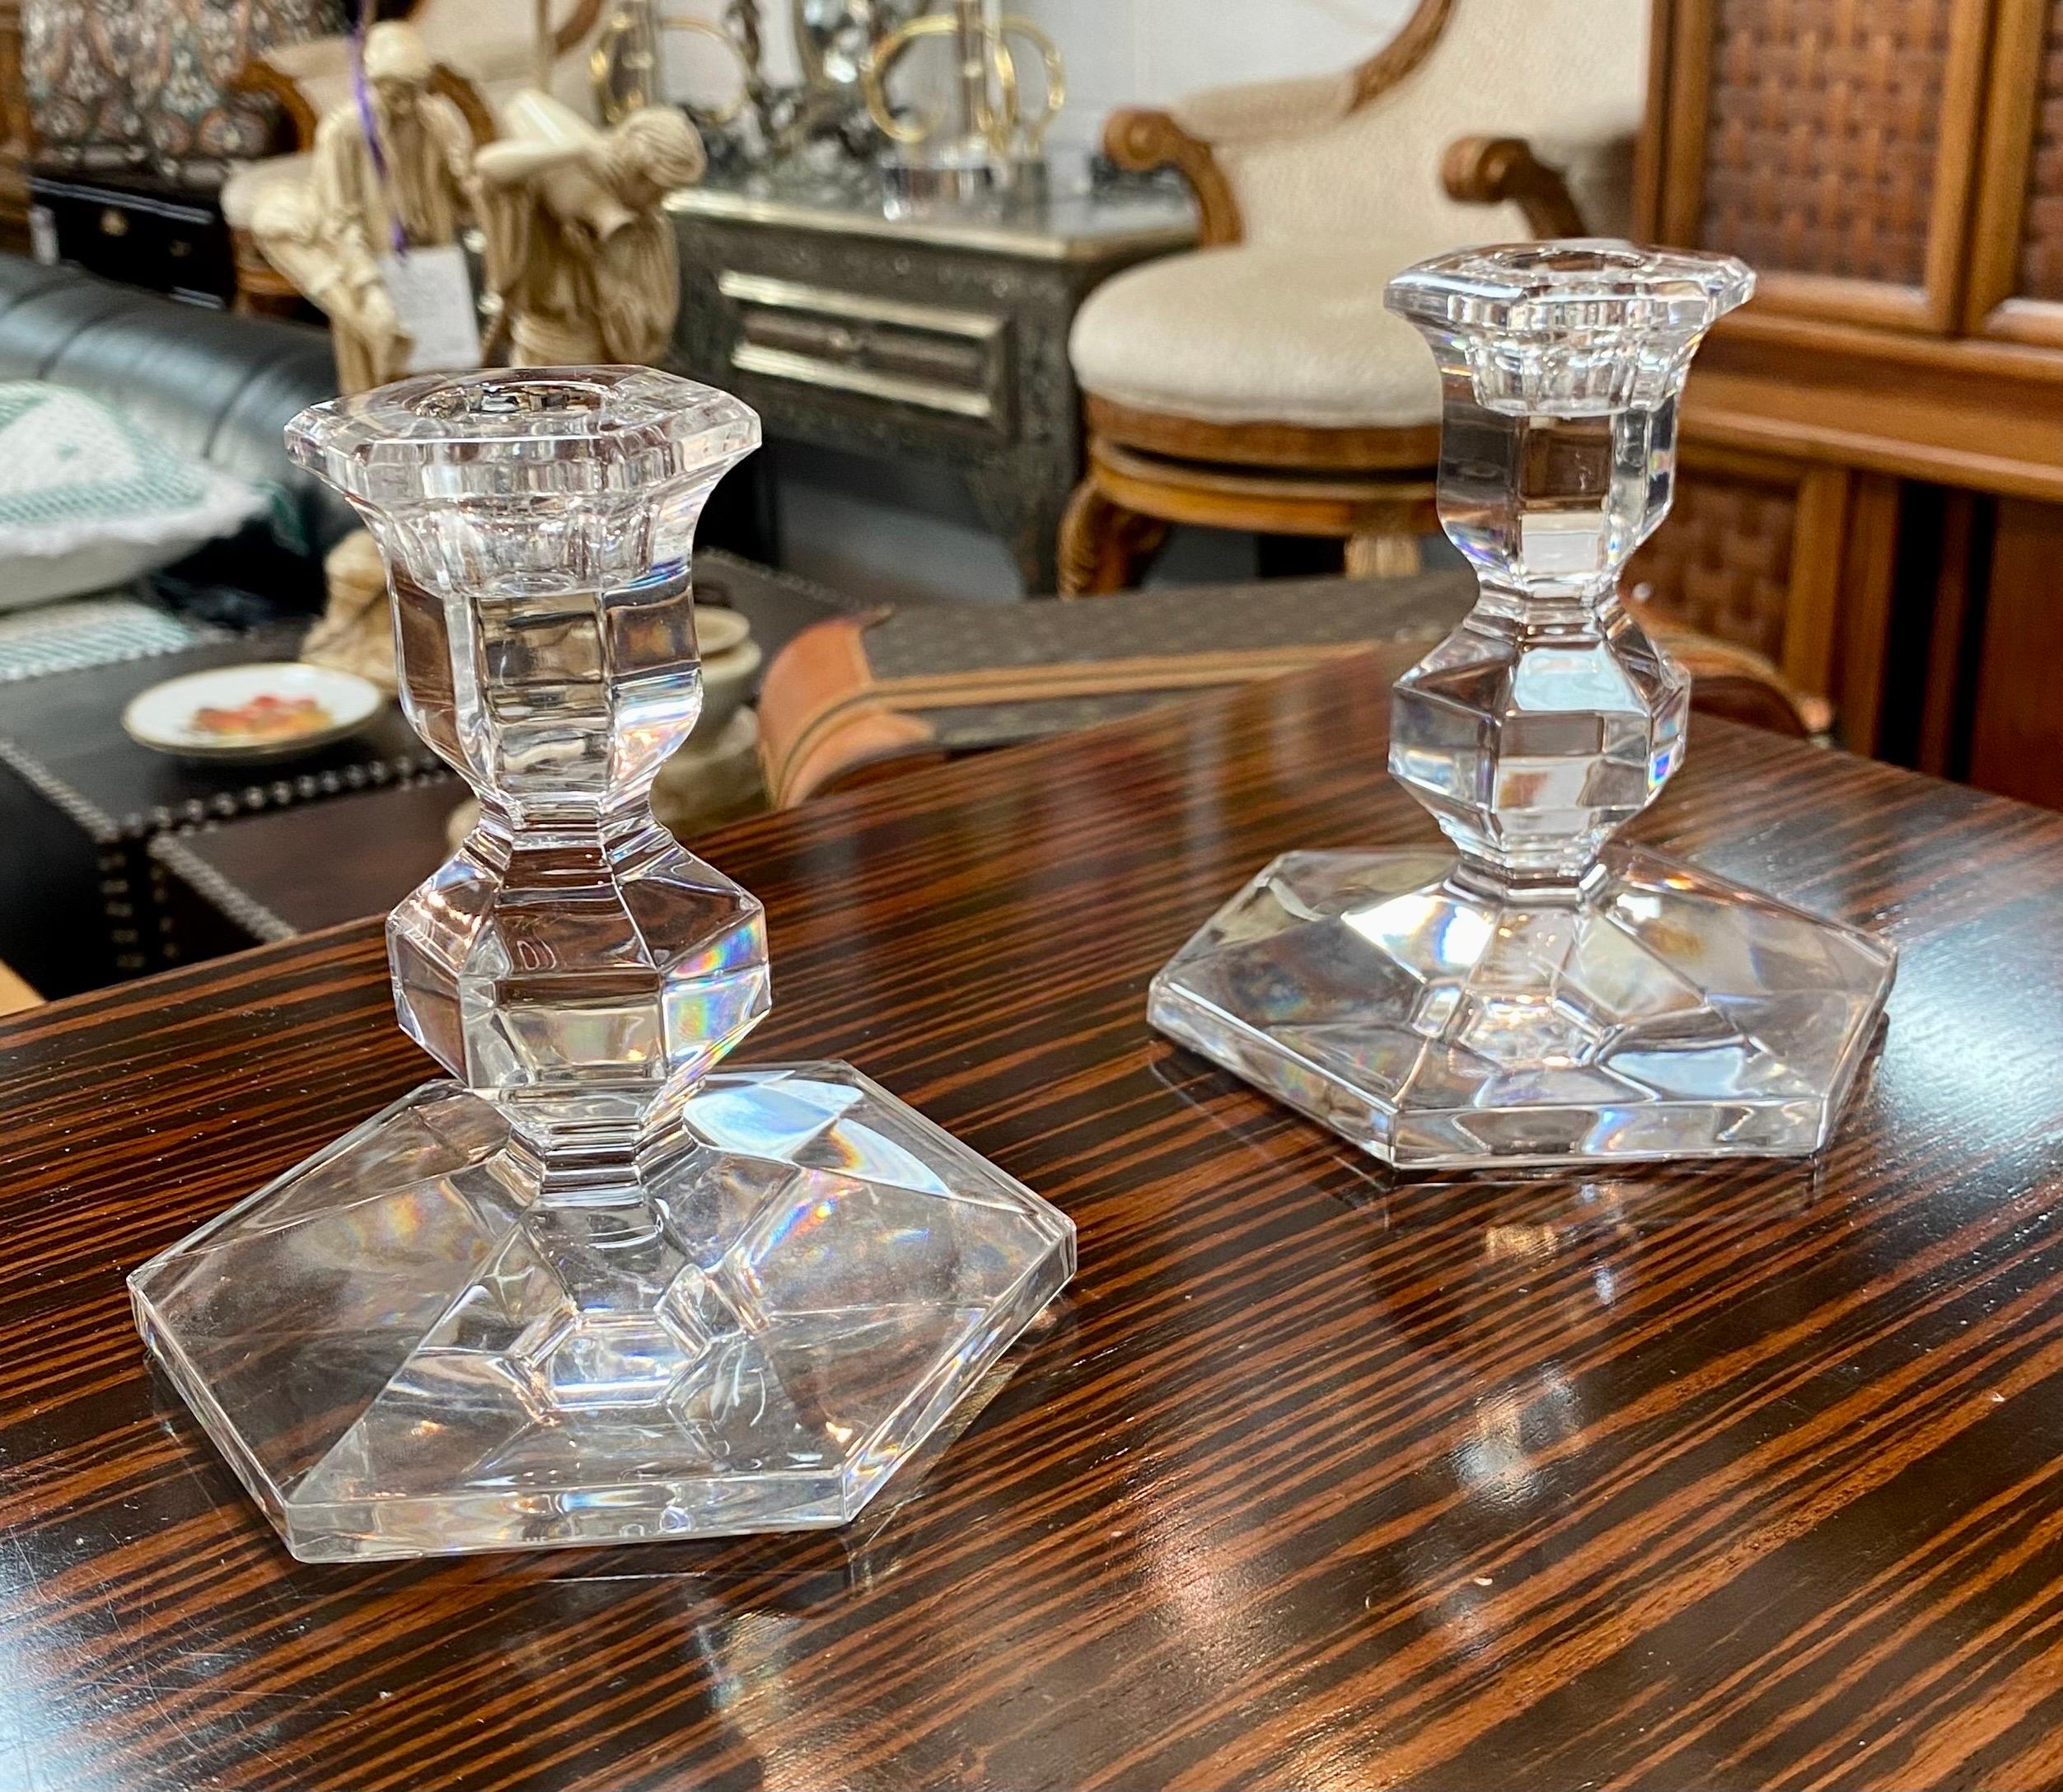 An elegant pair of Art Deco style clear crystal candlestick holders featuring an hexagon shape base and sconce. The stem is short and shows a diamond shape adding style and charm to this pair of candleholders. The candlesticks are signed Val St